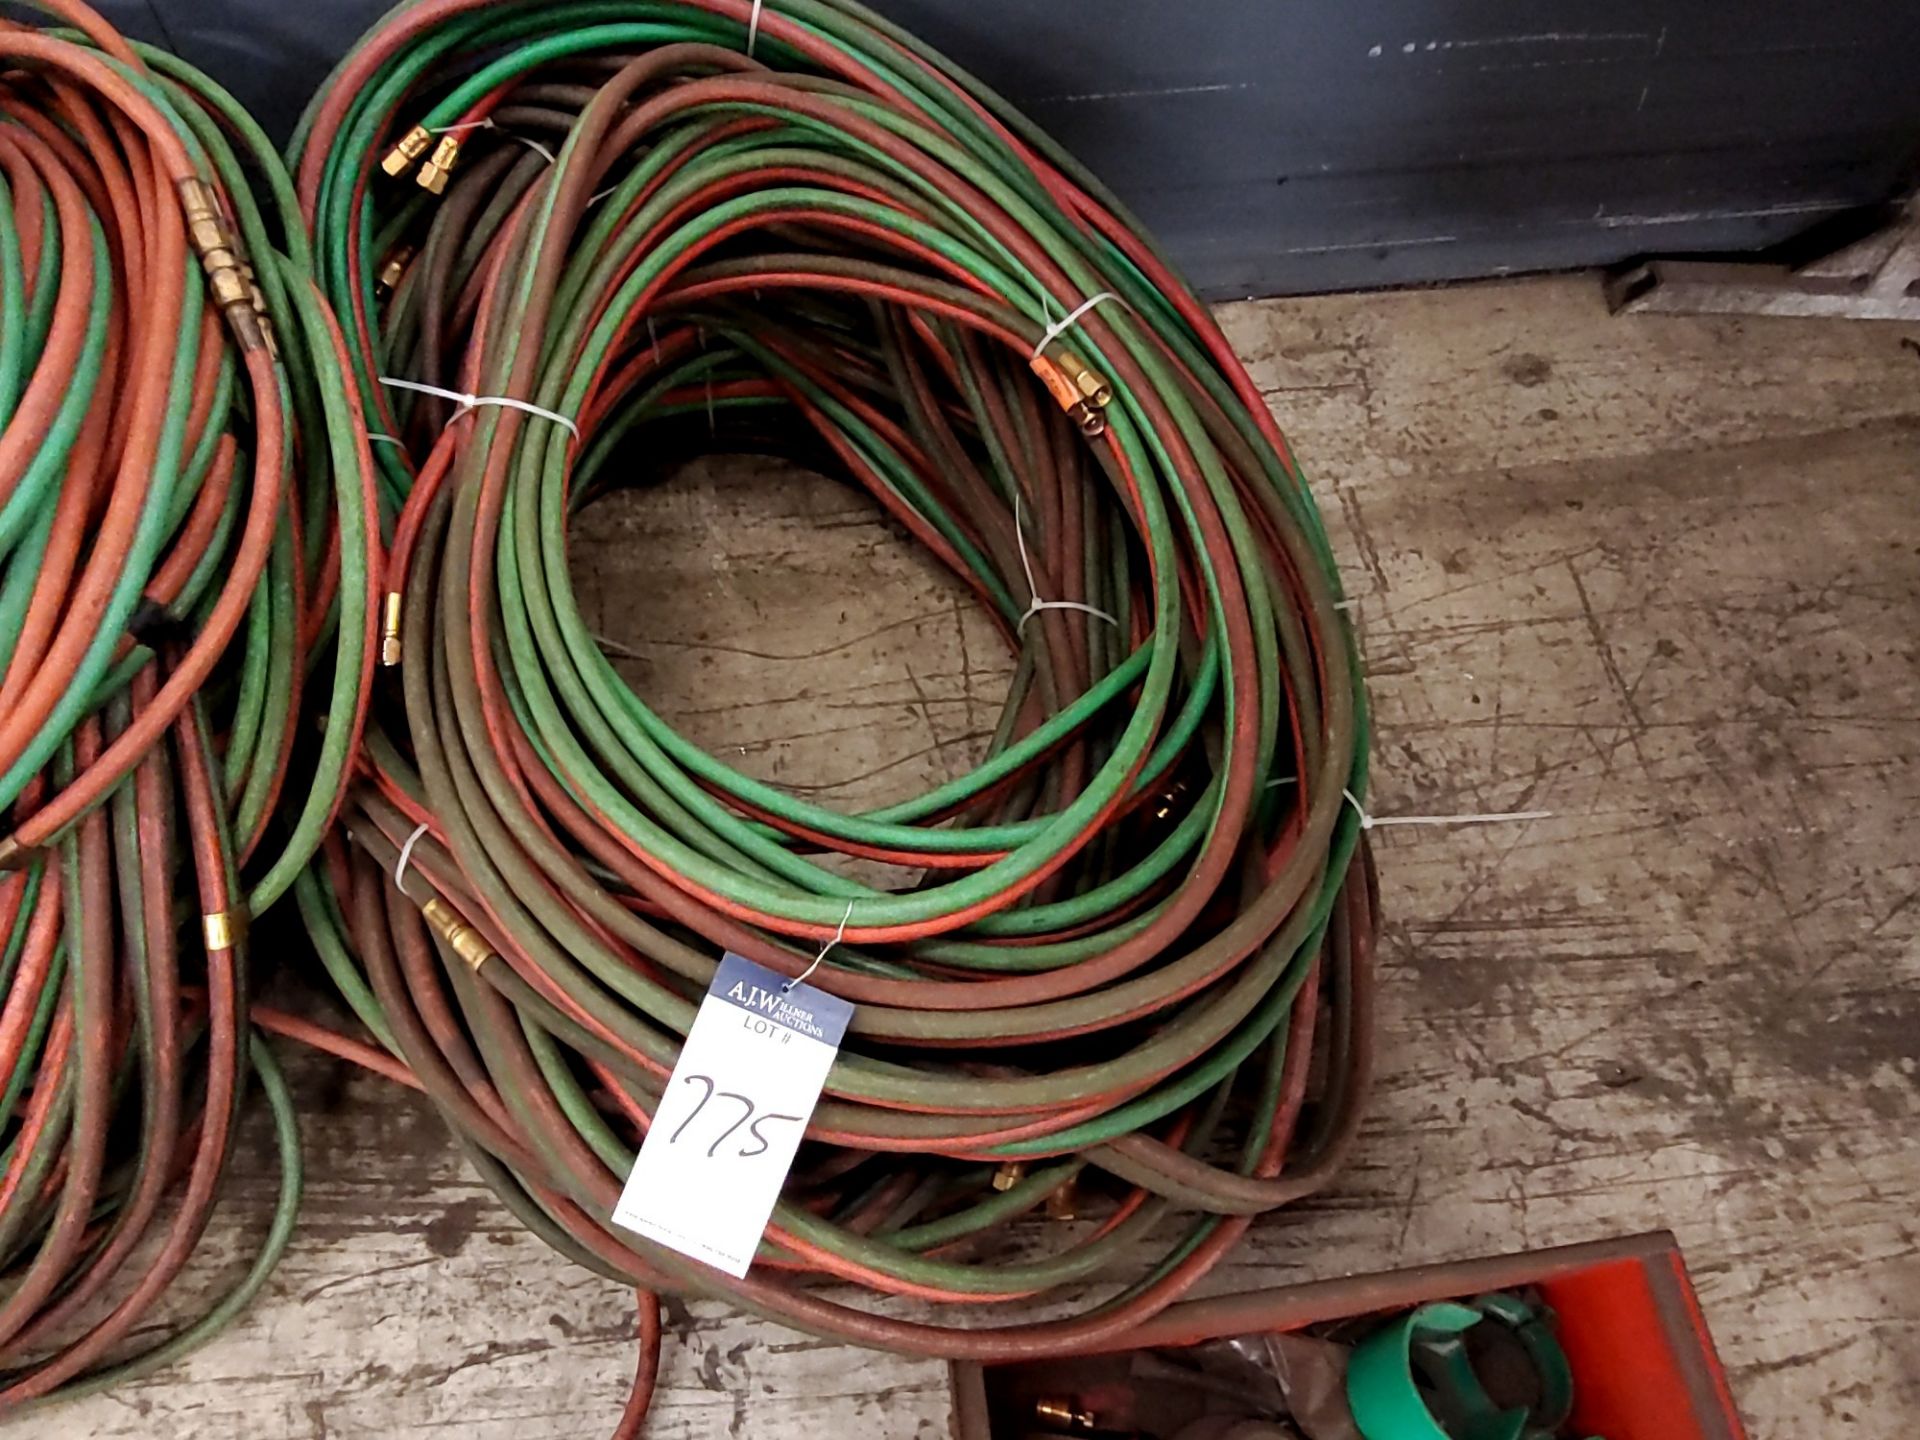 A GROUP OF TORCH WELDING HOSES